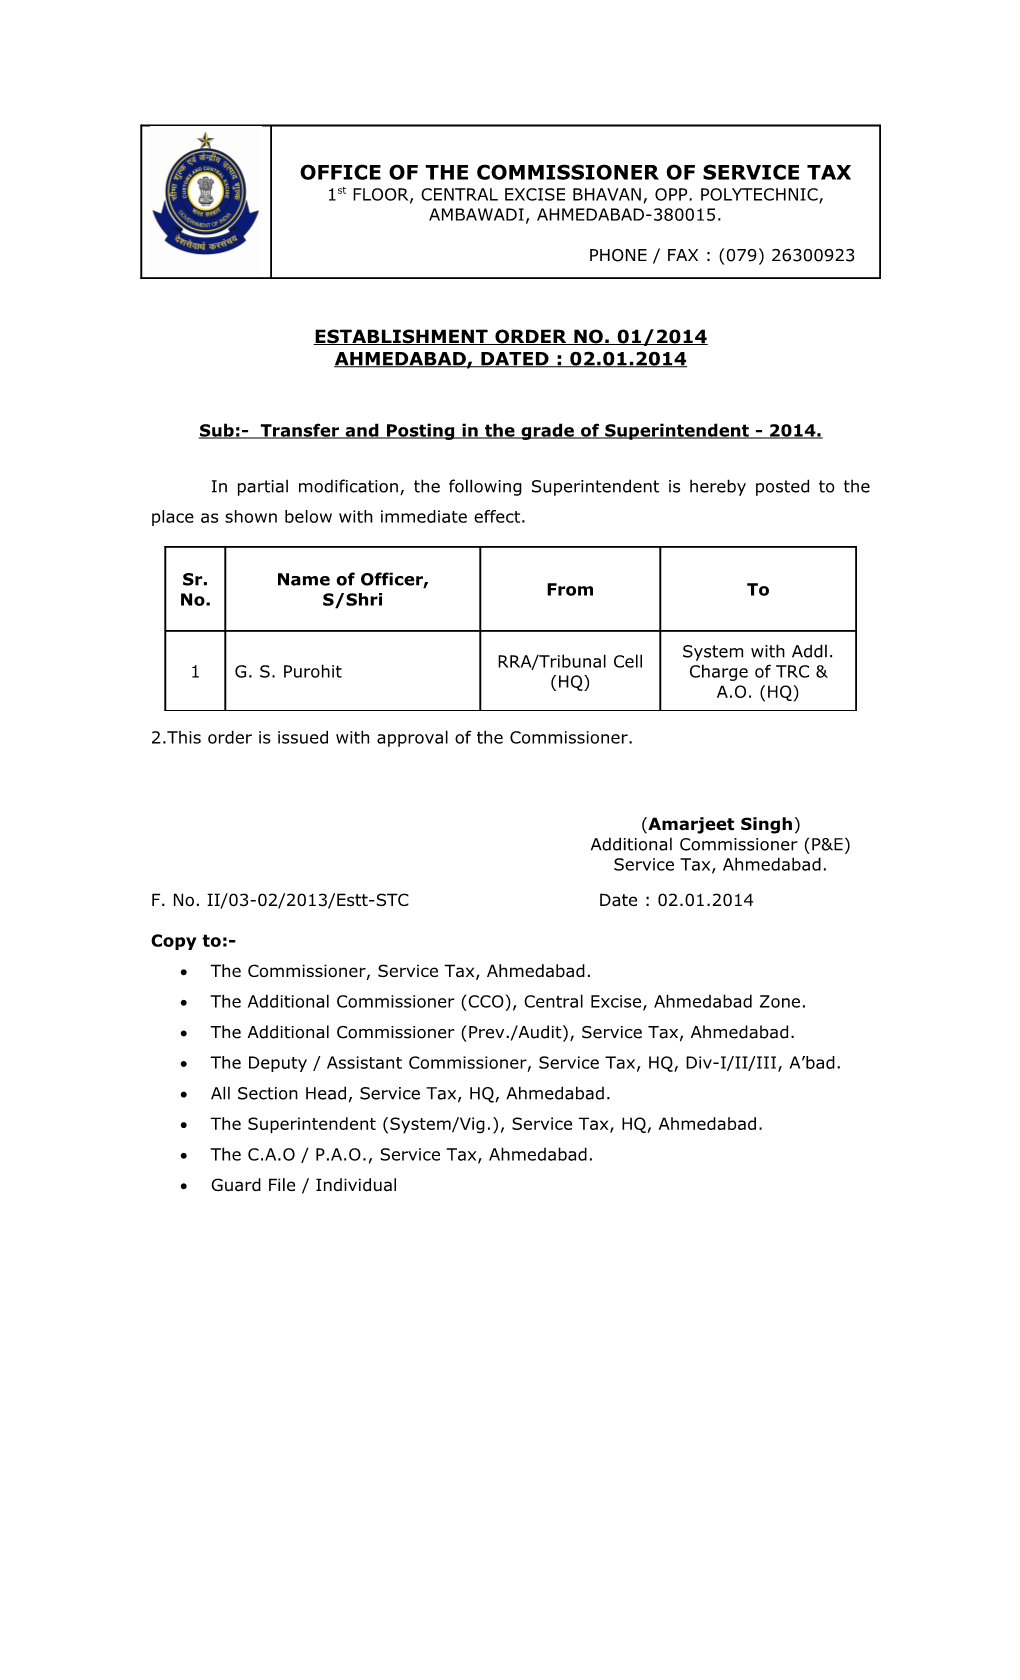 Sub:- Transfer and Posting in the Grade of Superintendent - 2014